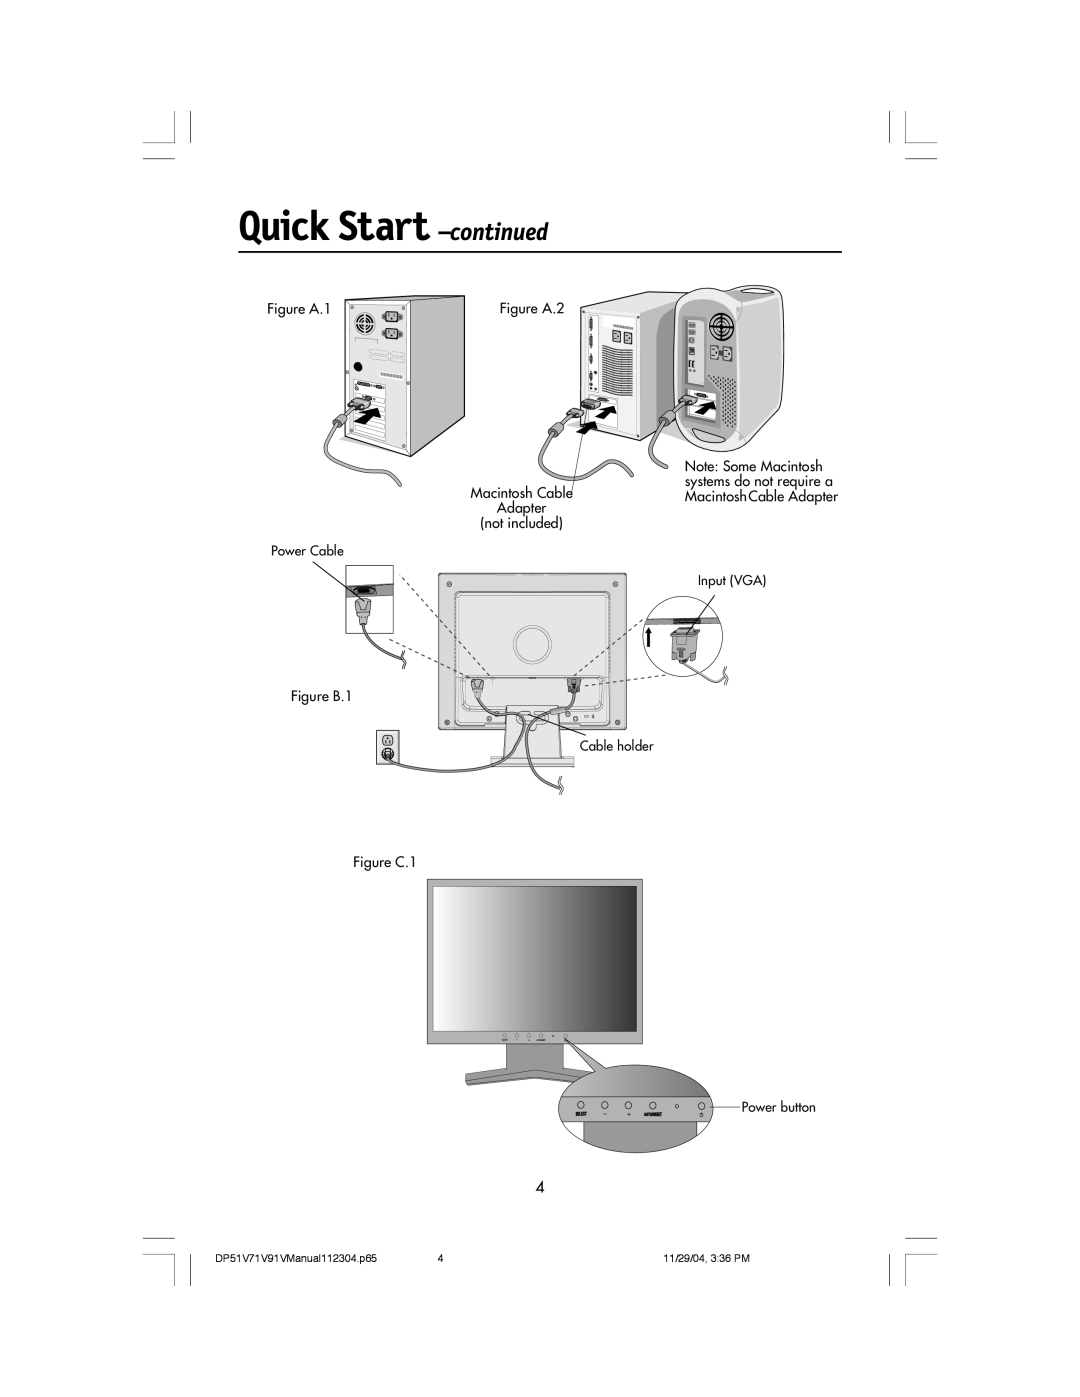 Mitsubishi Electronics V91LCD, V71LCD Quick Start -continued, Figure A.1, Macintosh Cable Adapter not included, Figure B.1 